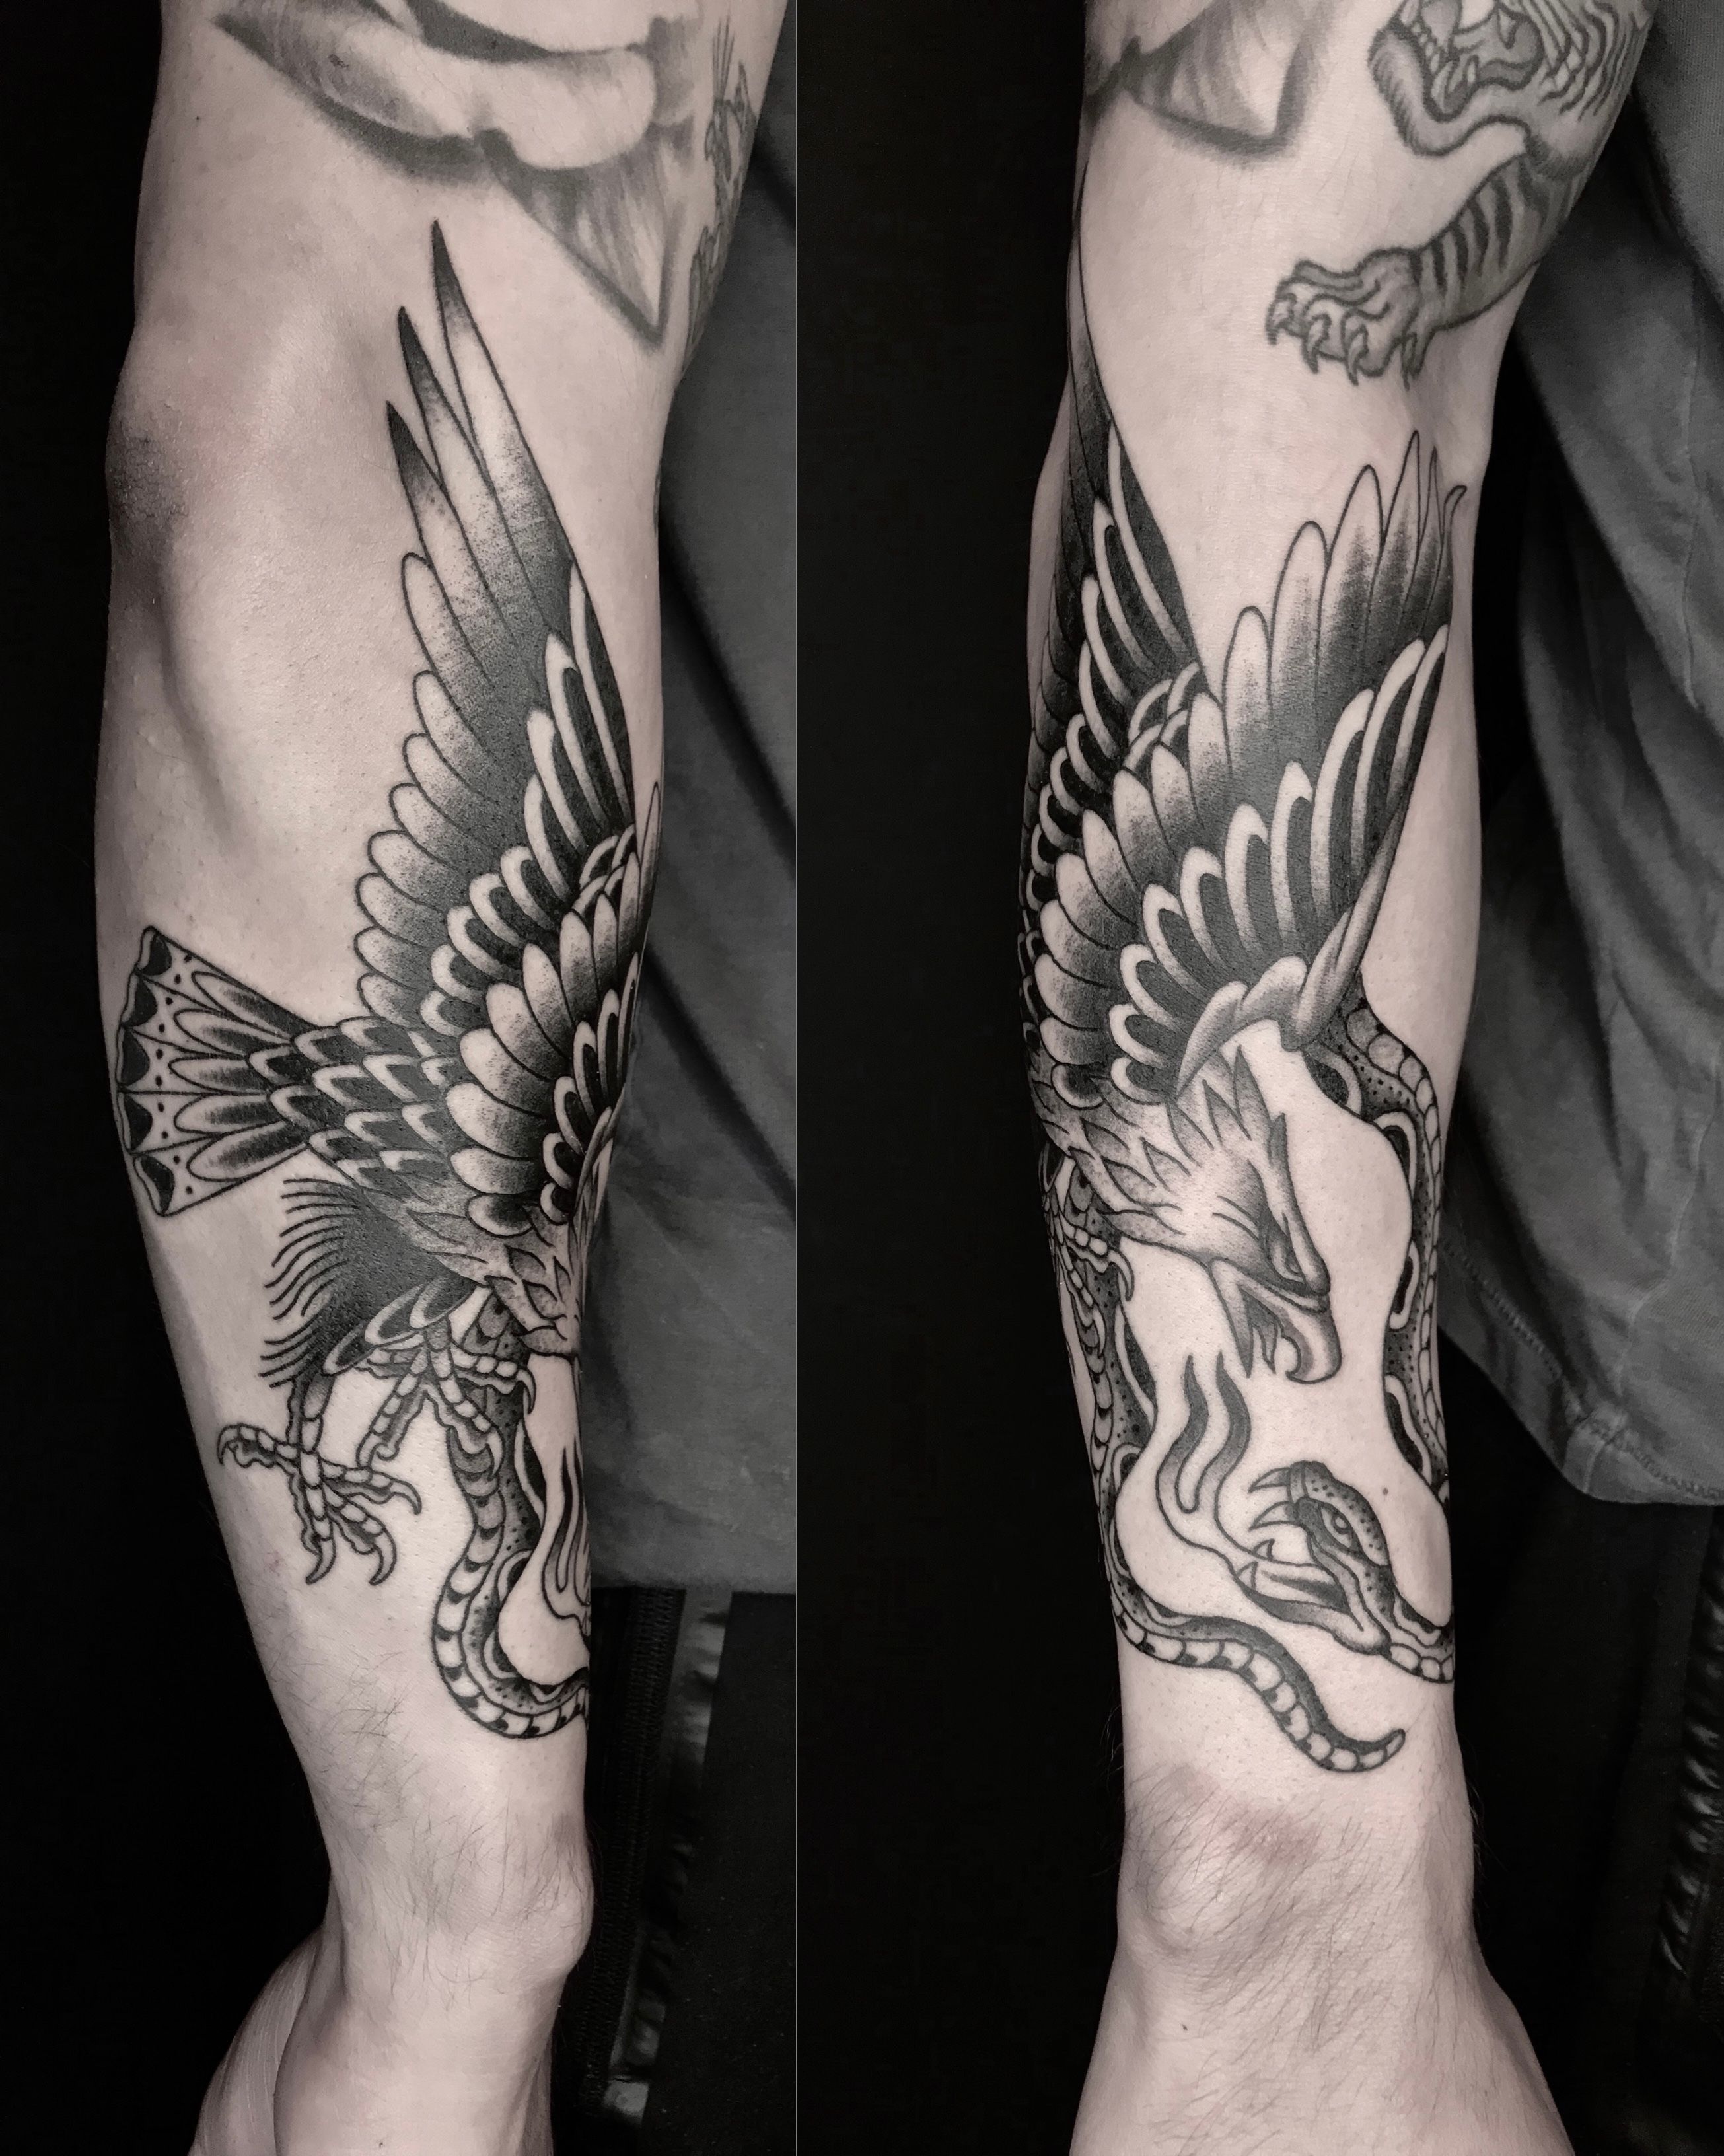 Tattoo uploaded by Nate Fierro • Black and grey eagle and snake wrapping  the right forearm. • Tattoodo